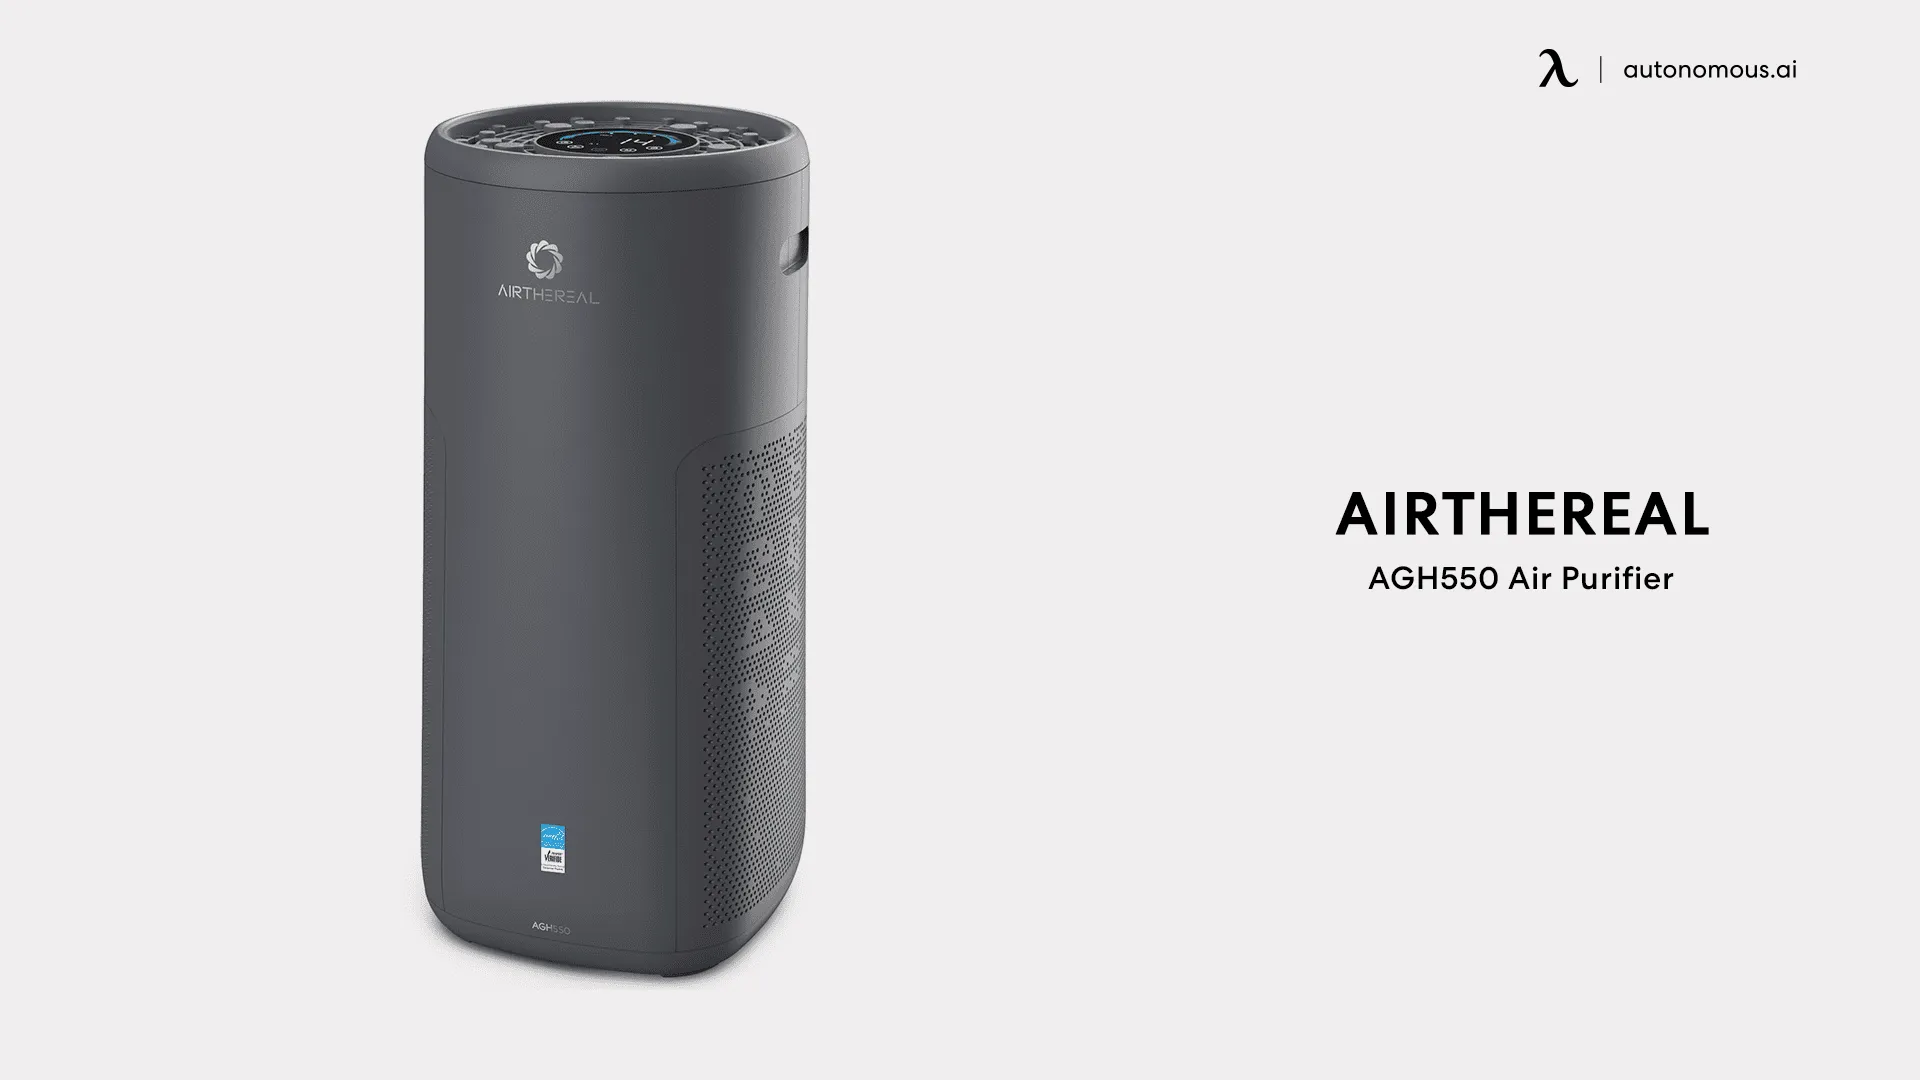 Airthereal AGH550 Air Purifier (750 sq ft model)